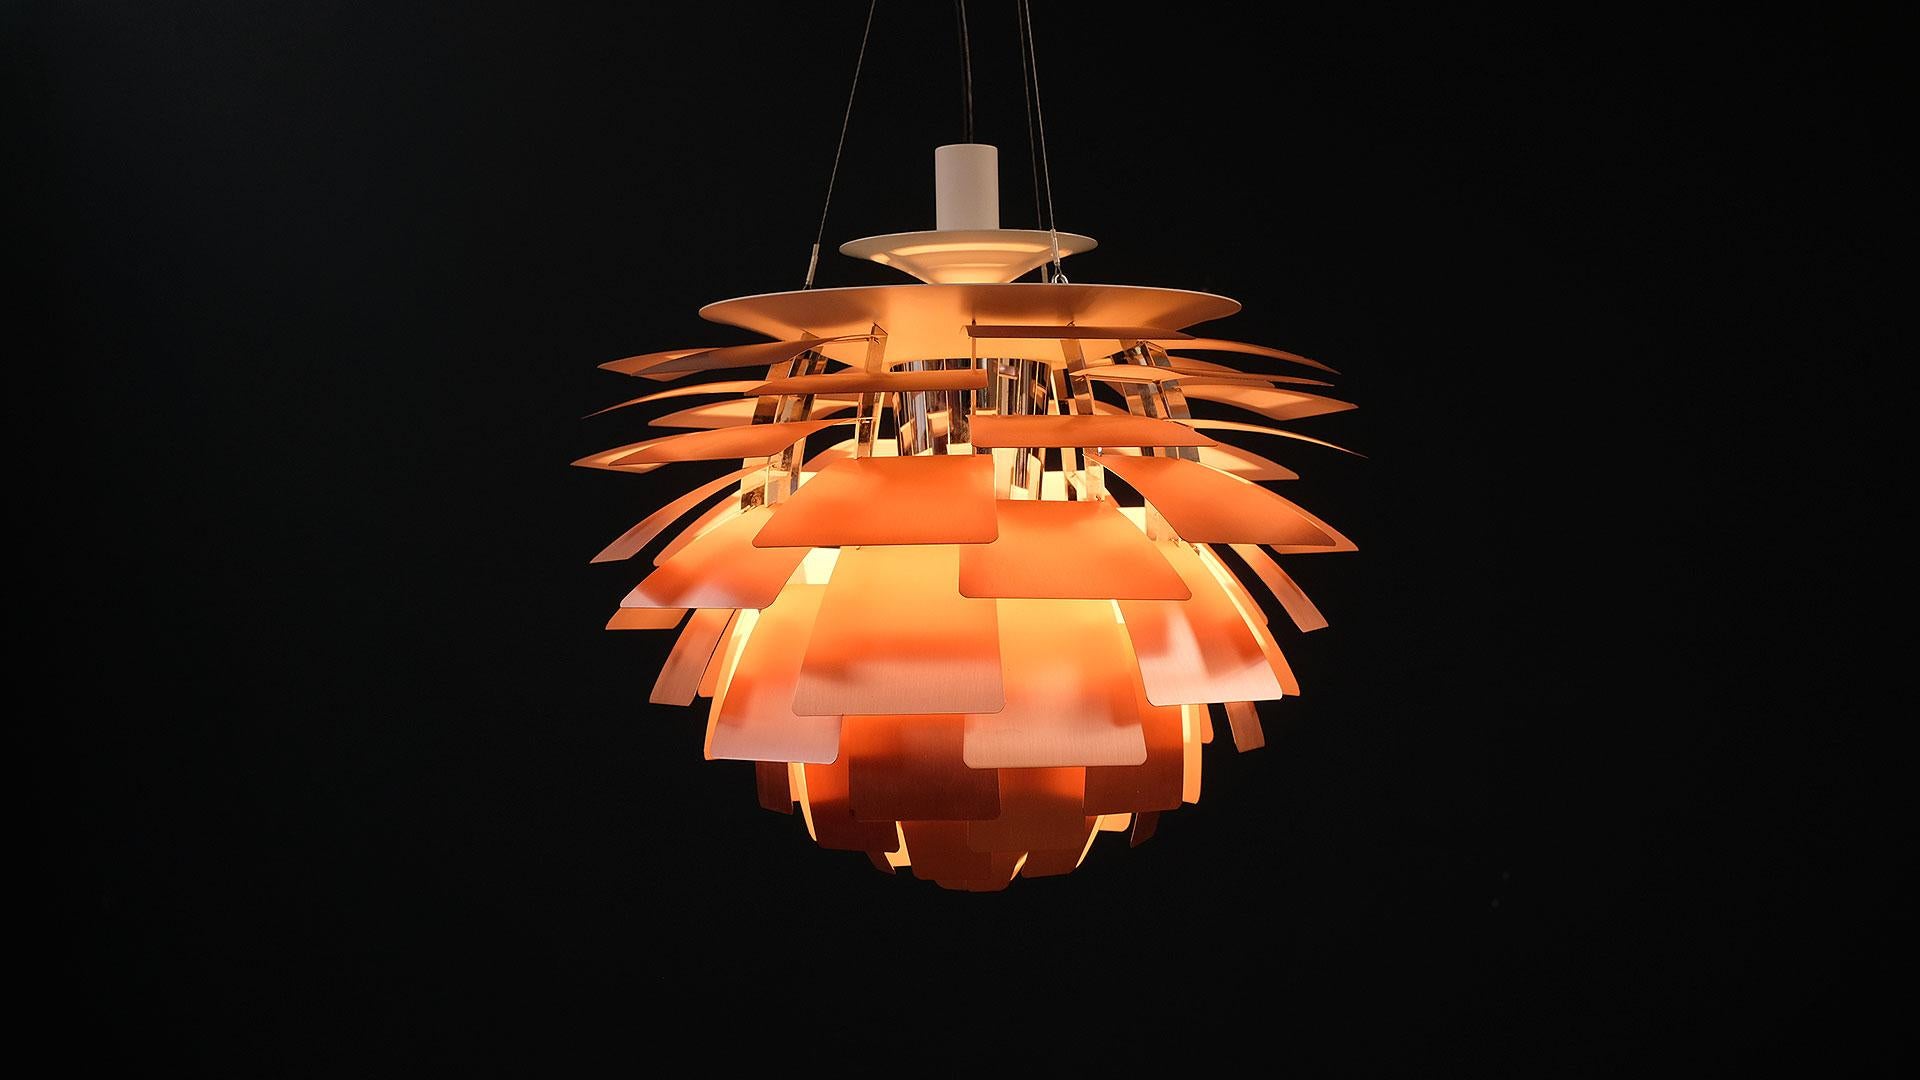 Vintage Poul Henningsen Artichoke pendant light. 60cm diameter example with light patina to the copper shades. Iconic and beautiful.